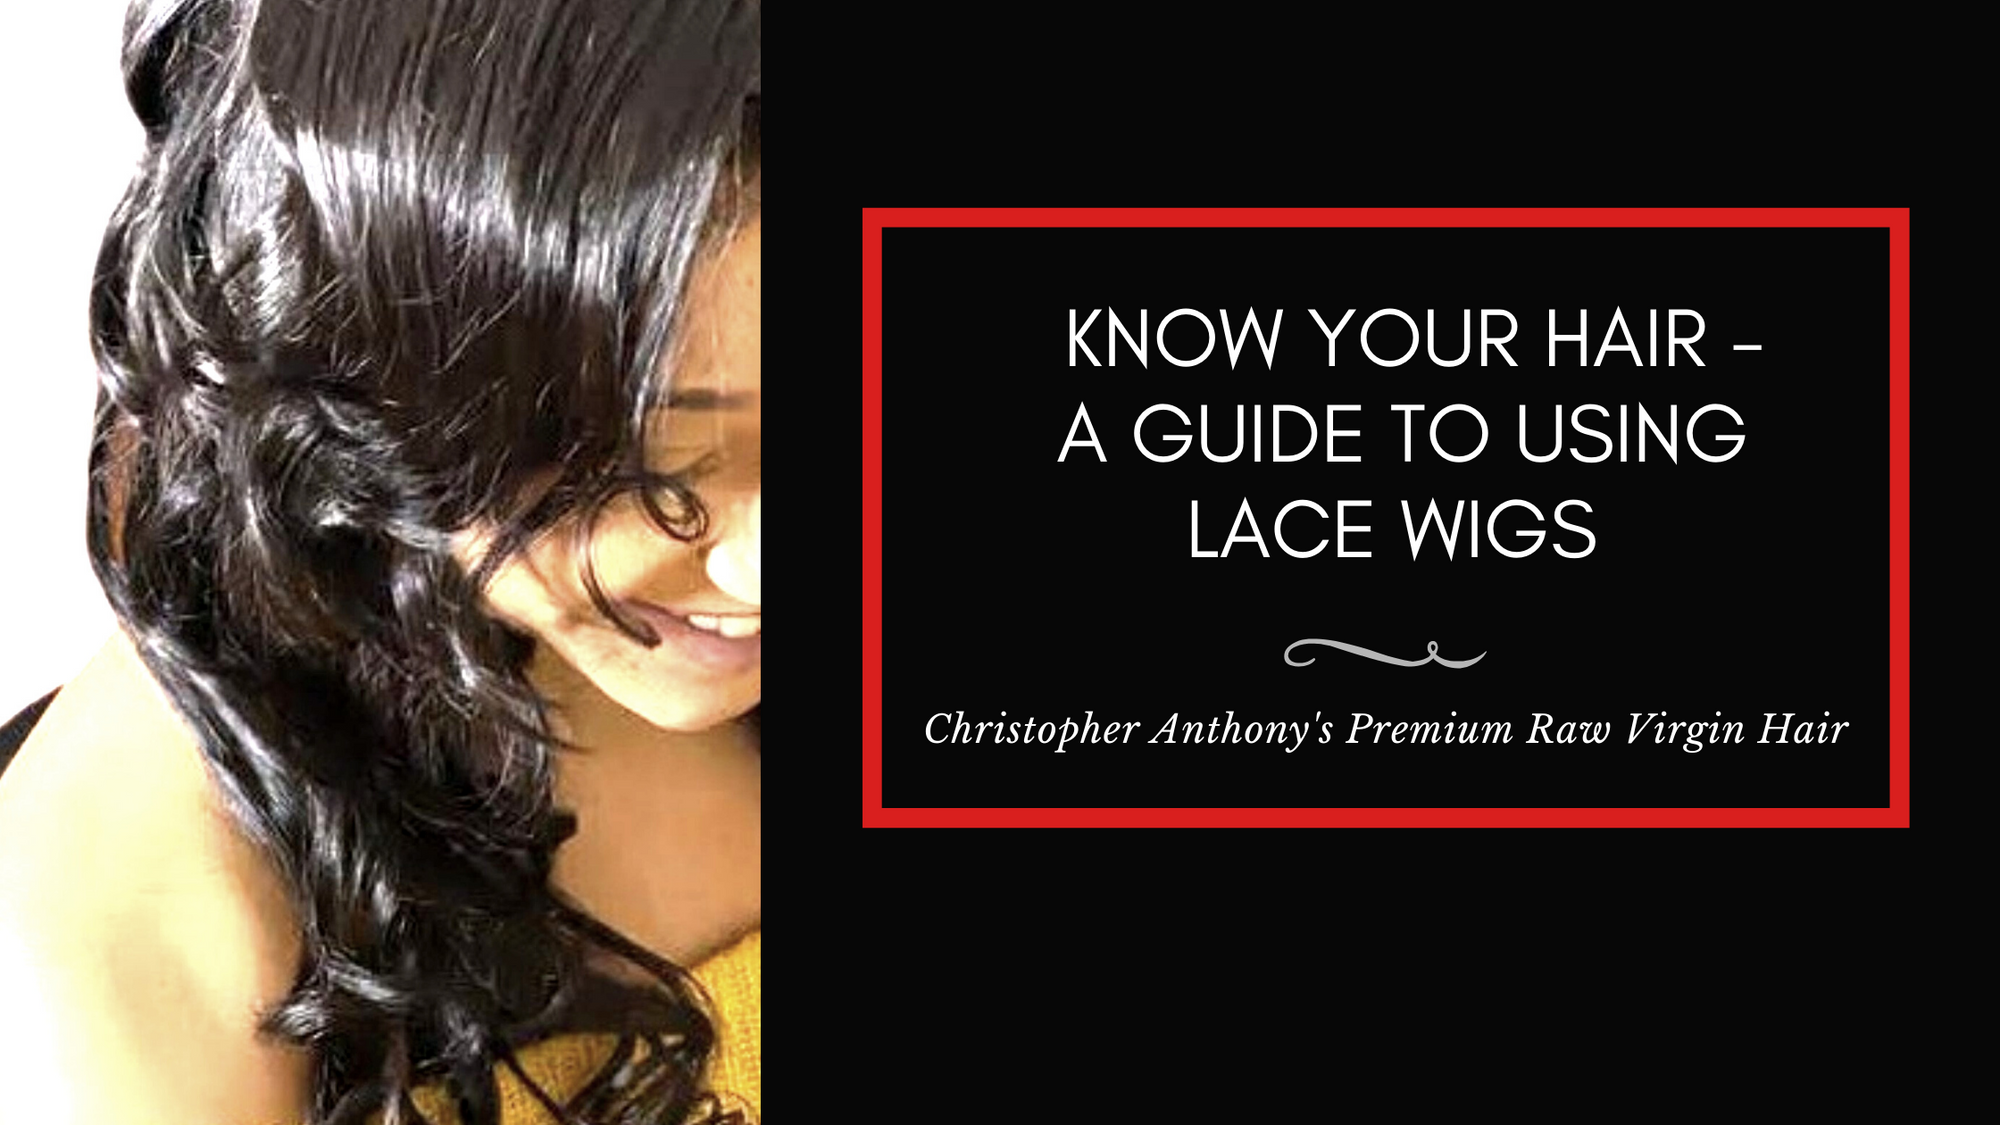 Know Your Hair - A Guide to Using Lace Wigs